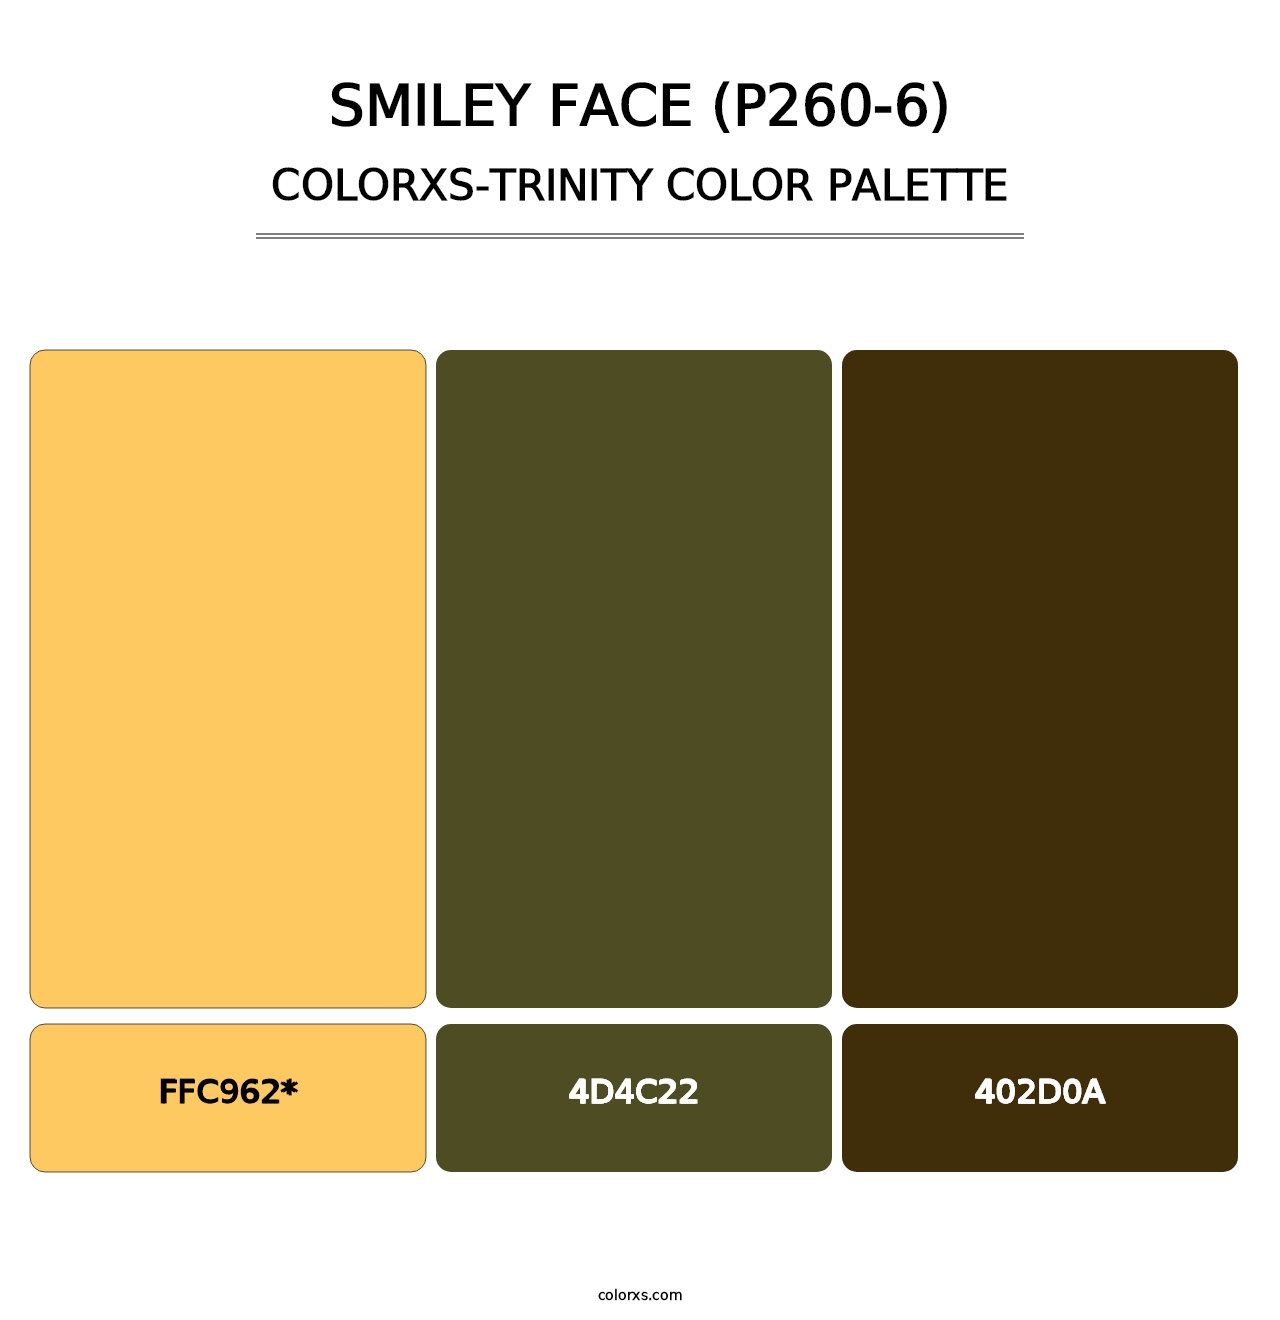 Smiley Face (P260-6) - Colorxs Trinity Palette